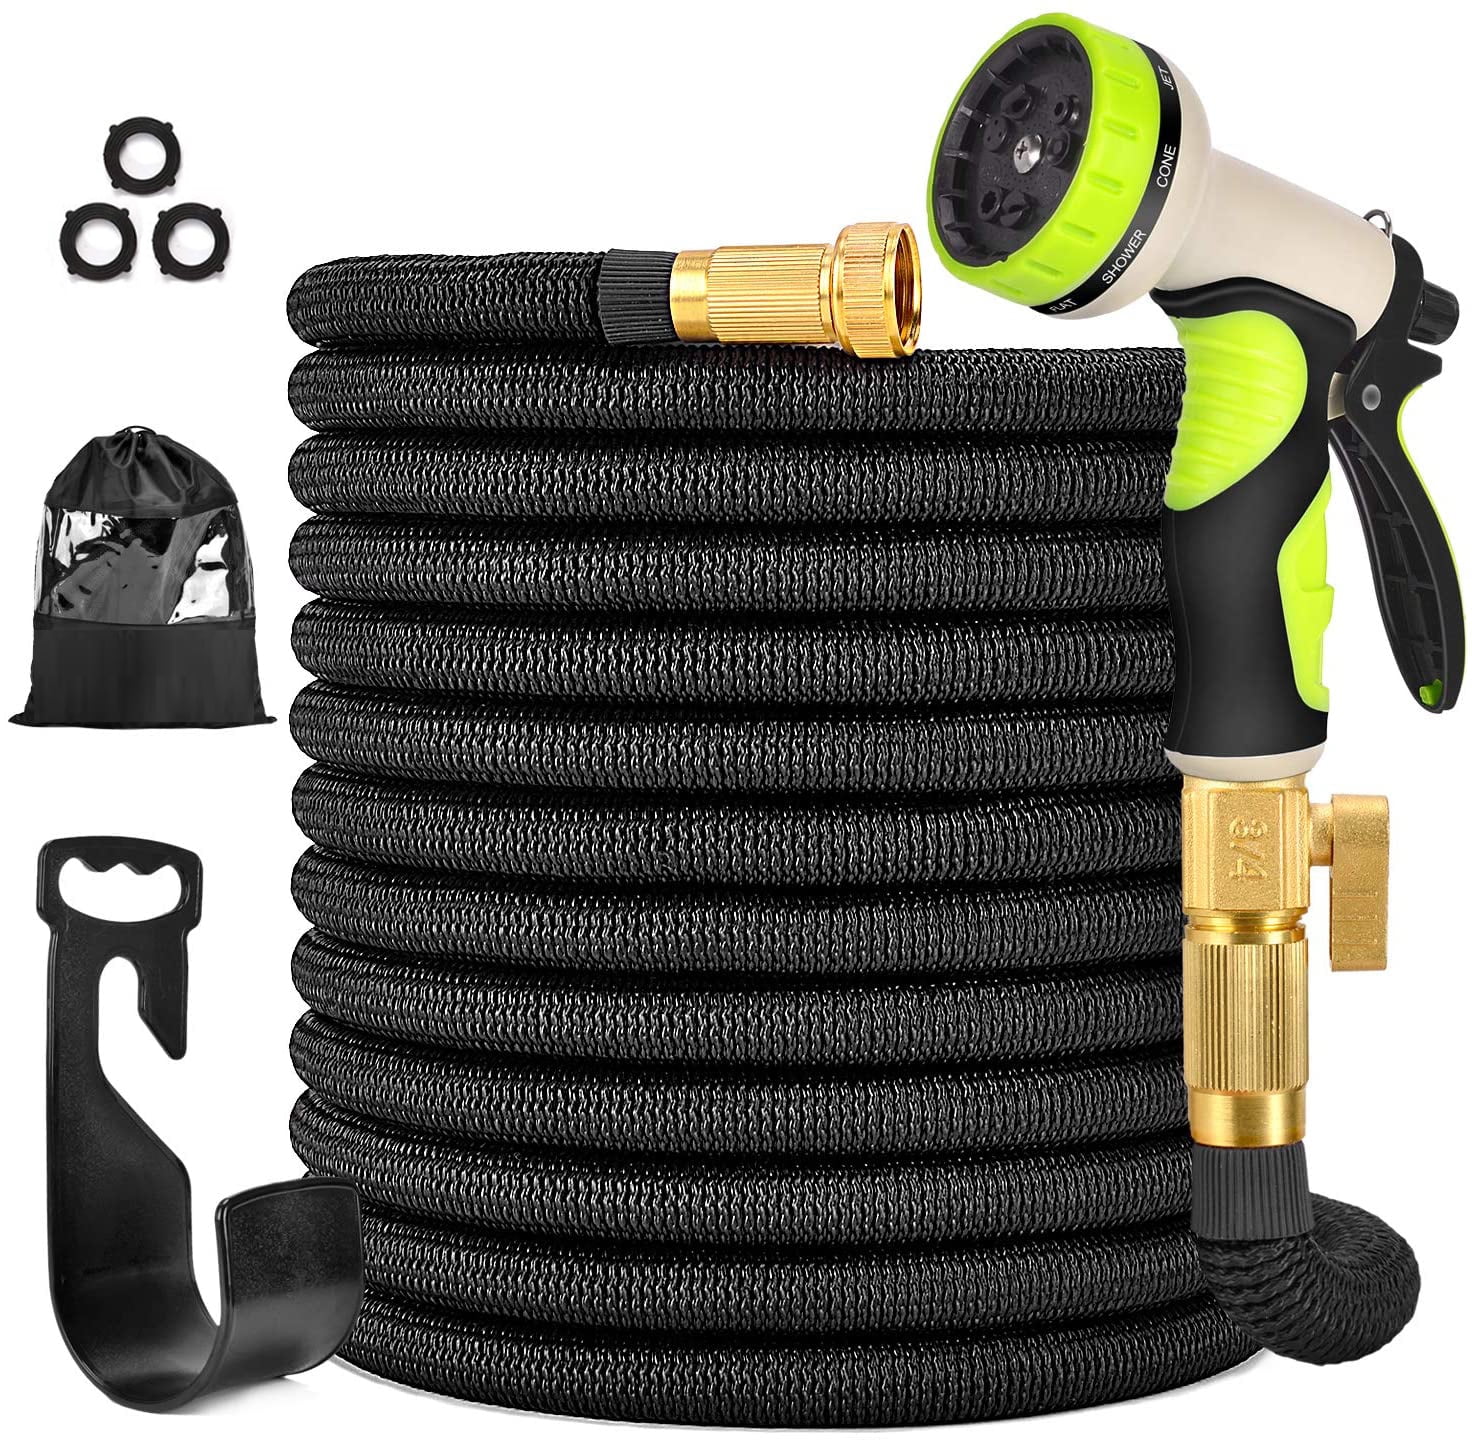 Ovareo Garden Hose 50 Feet Expandable Garden Hose Strongest Expanding Garden Hose on The Market with Triple Layer Latex Core & Latest Improved Extra Strength Fabric. Green